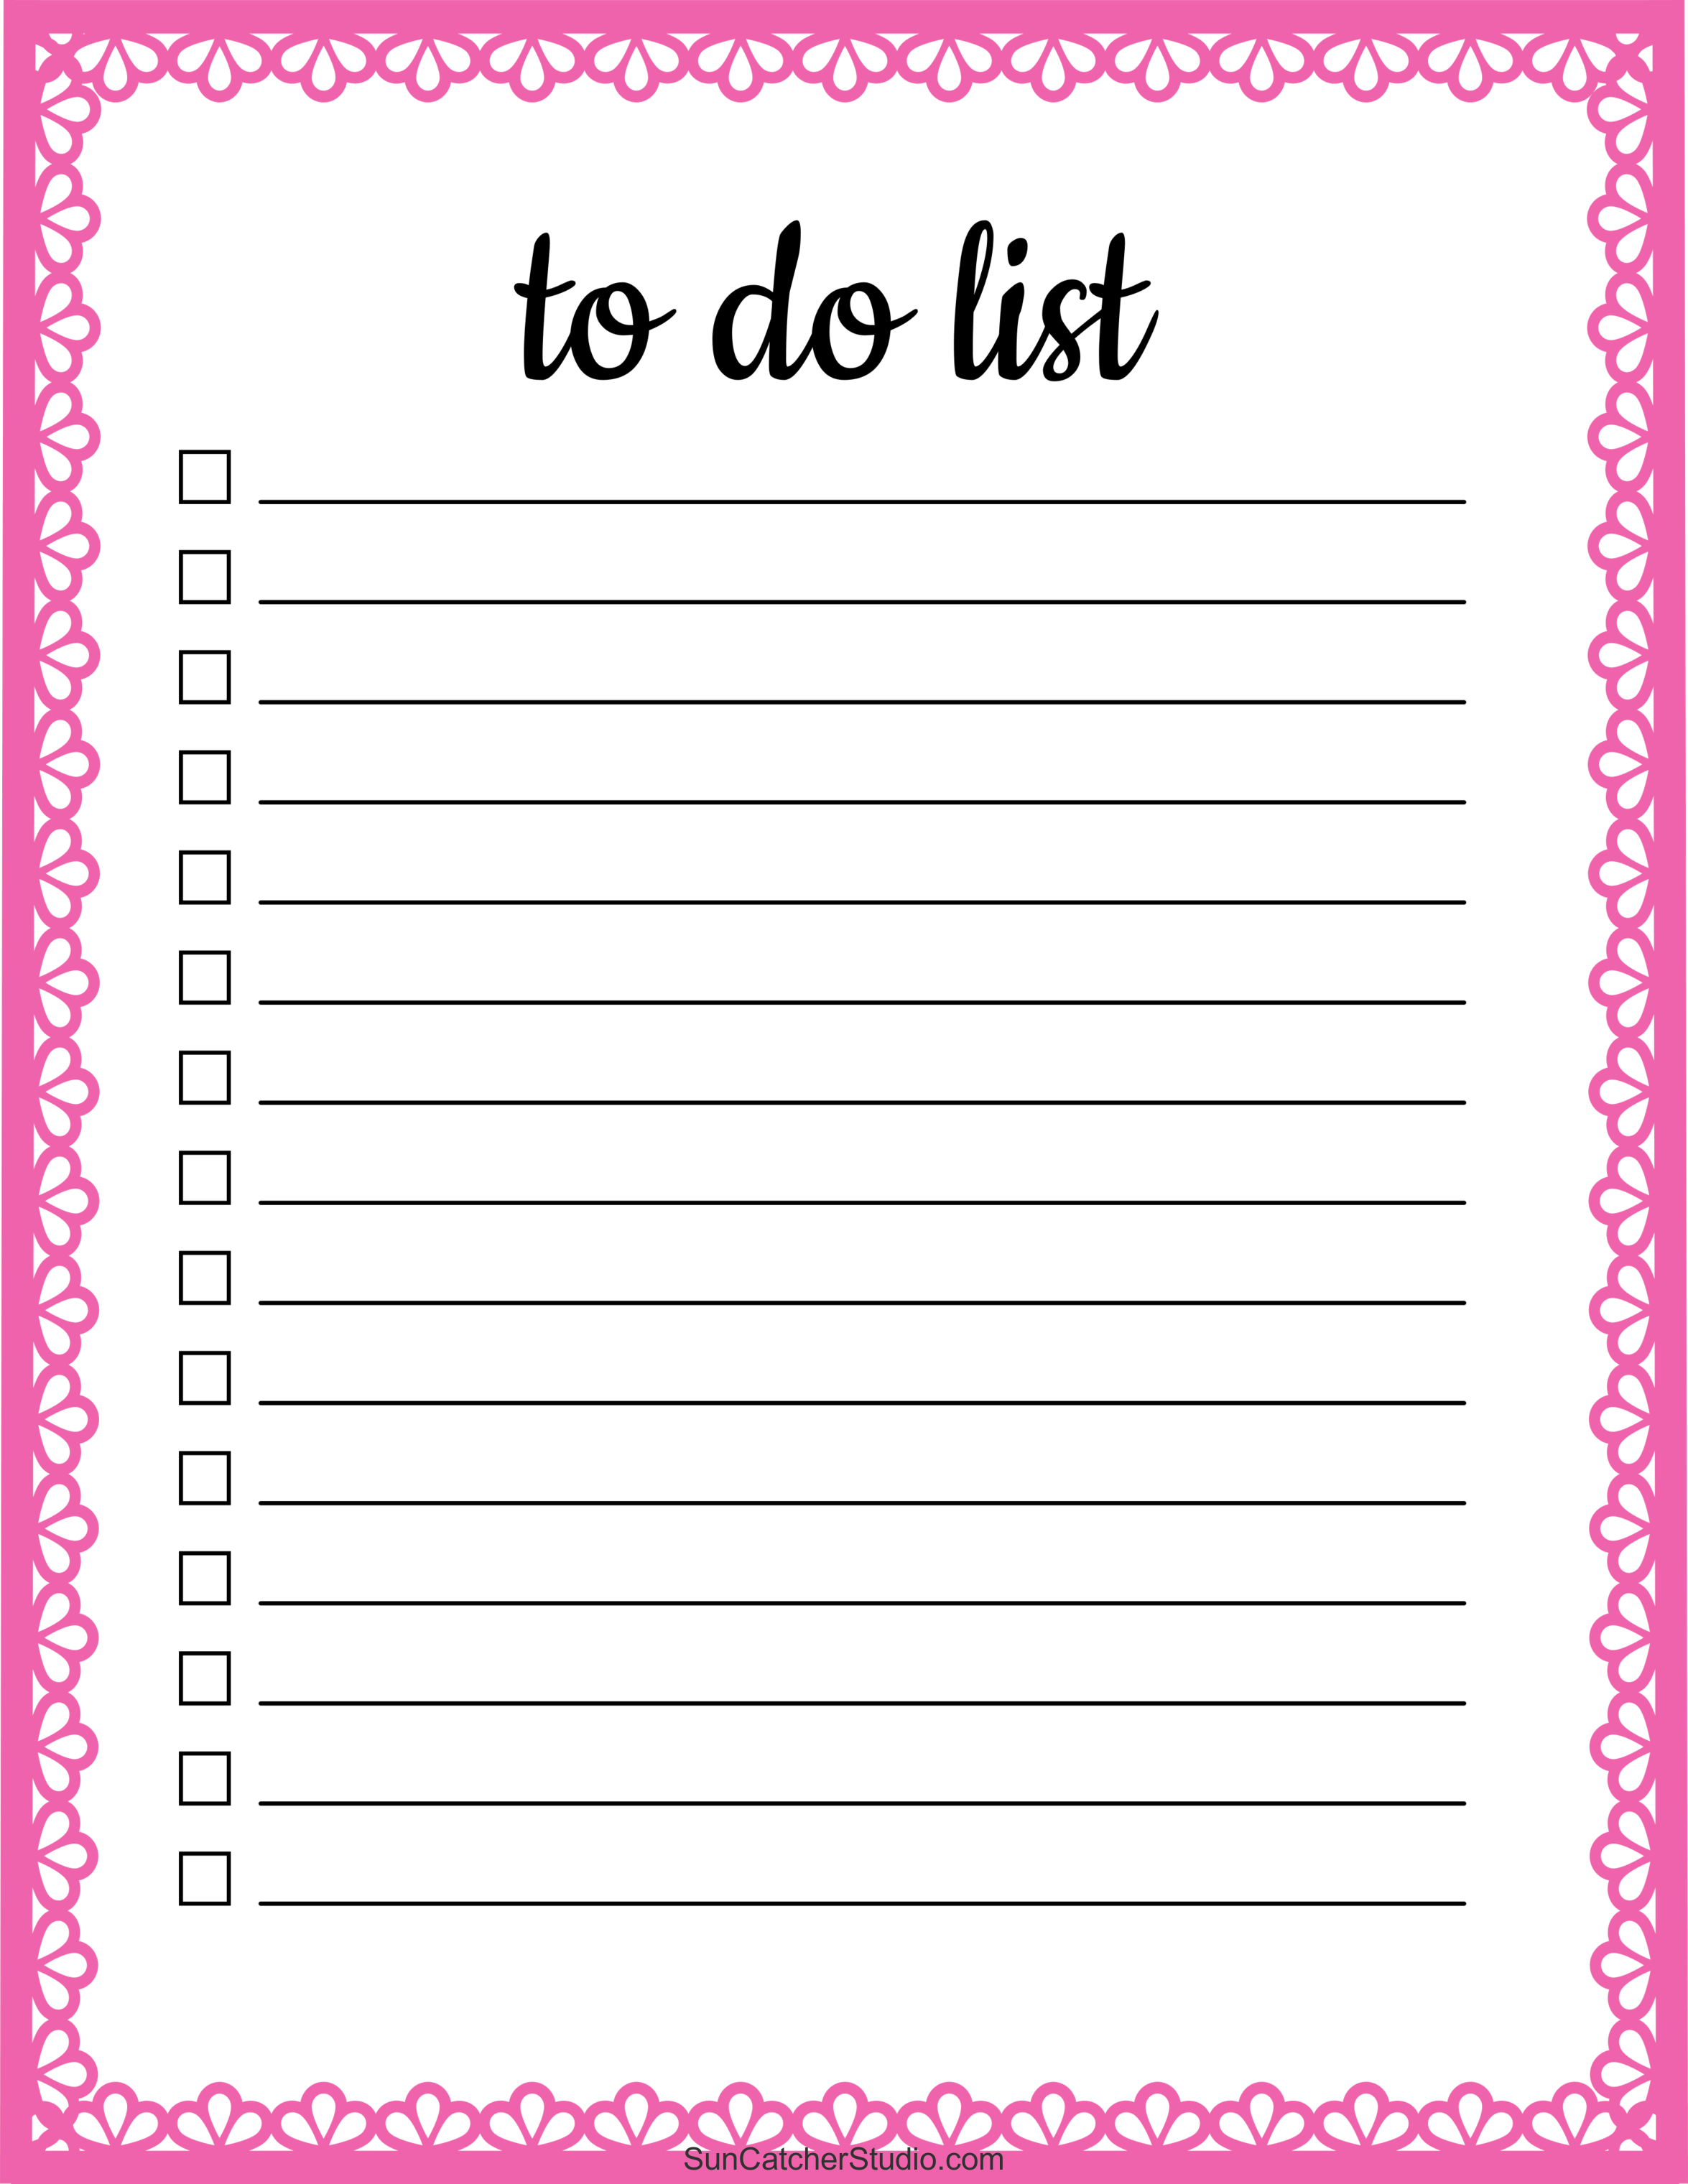 To Do List (Free Printable PDF Templates) – Things To Do – DIY Projects,  Patterns, Monograms, Designs, Templates